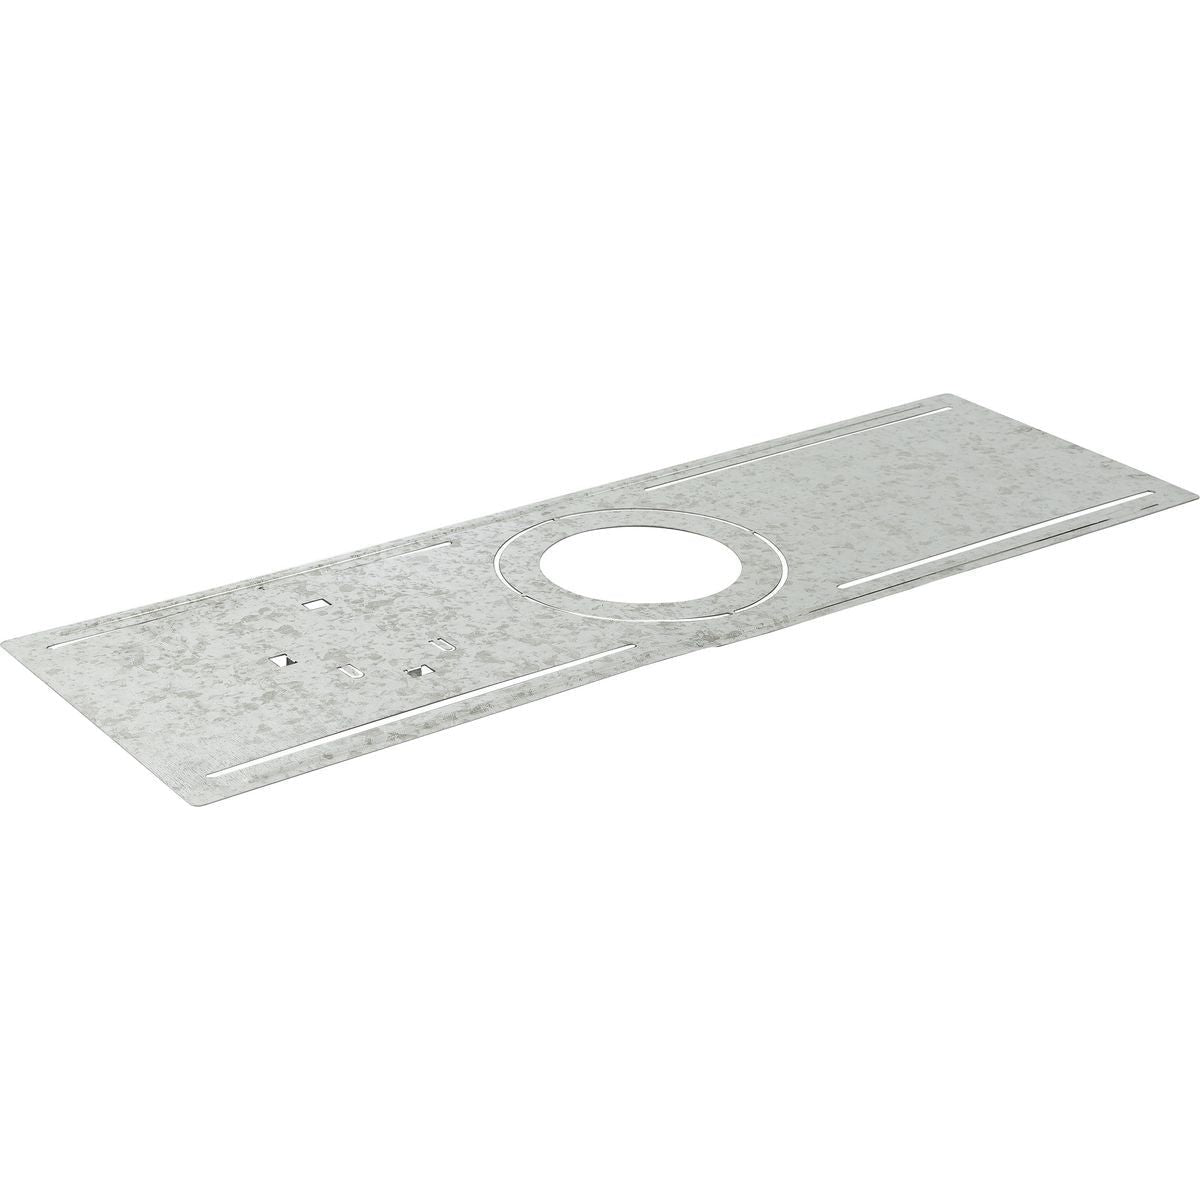 Everlume Recessed Mounting Plate